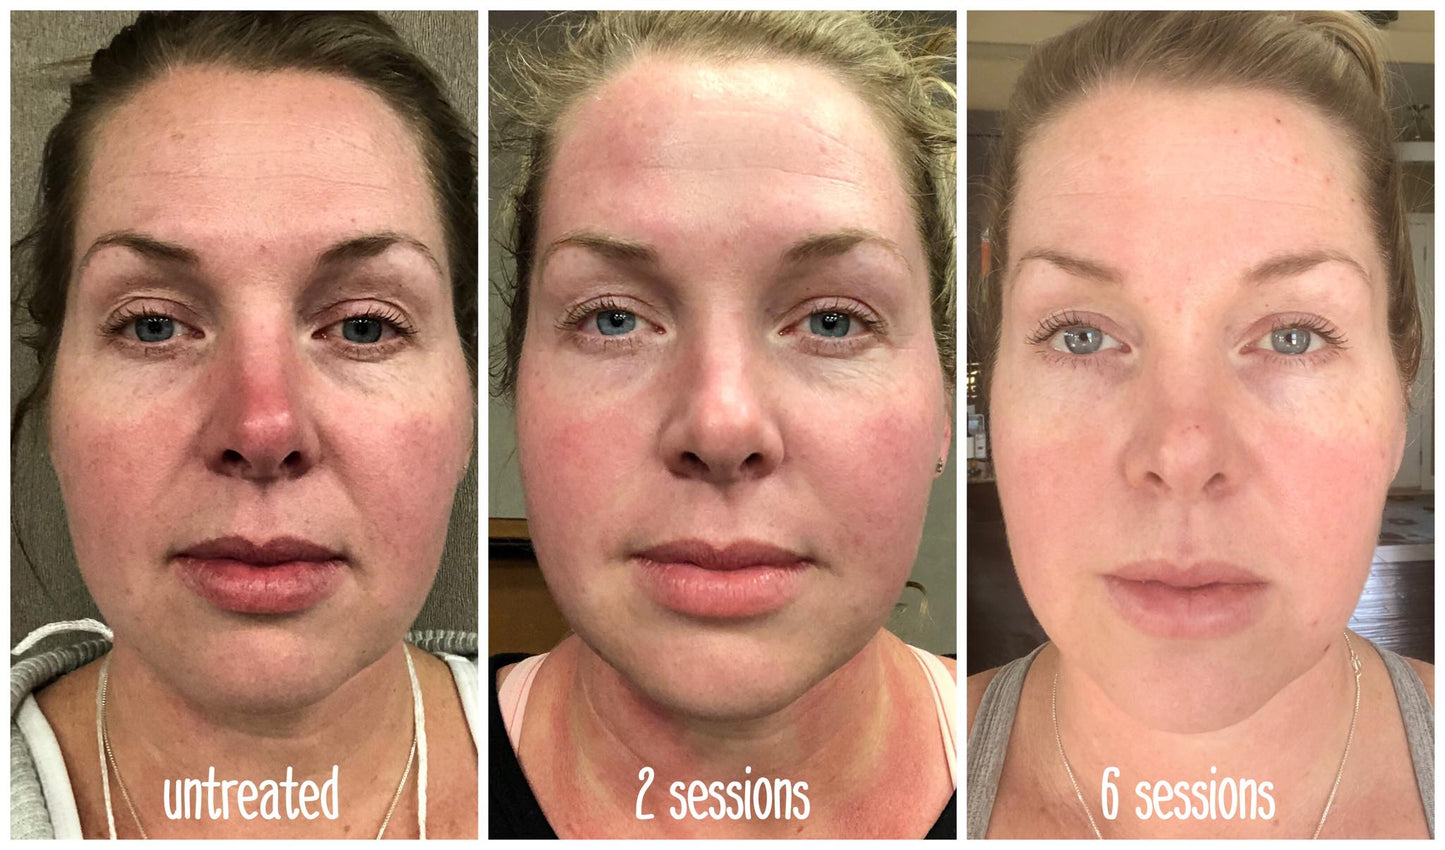 After 2 and 6 sessions! Notice the skin texture and tone, redness on nose is gone, eyes appear lifted. Colour of eyes even appear lightened. Grooves around mouth softened, hooding around eyes reduced. wrinkles on forehead reduced. Overall puffiness reduced.